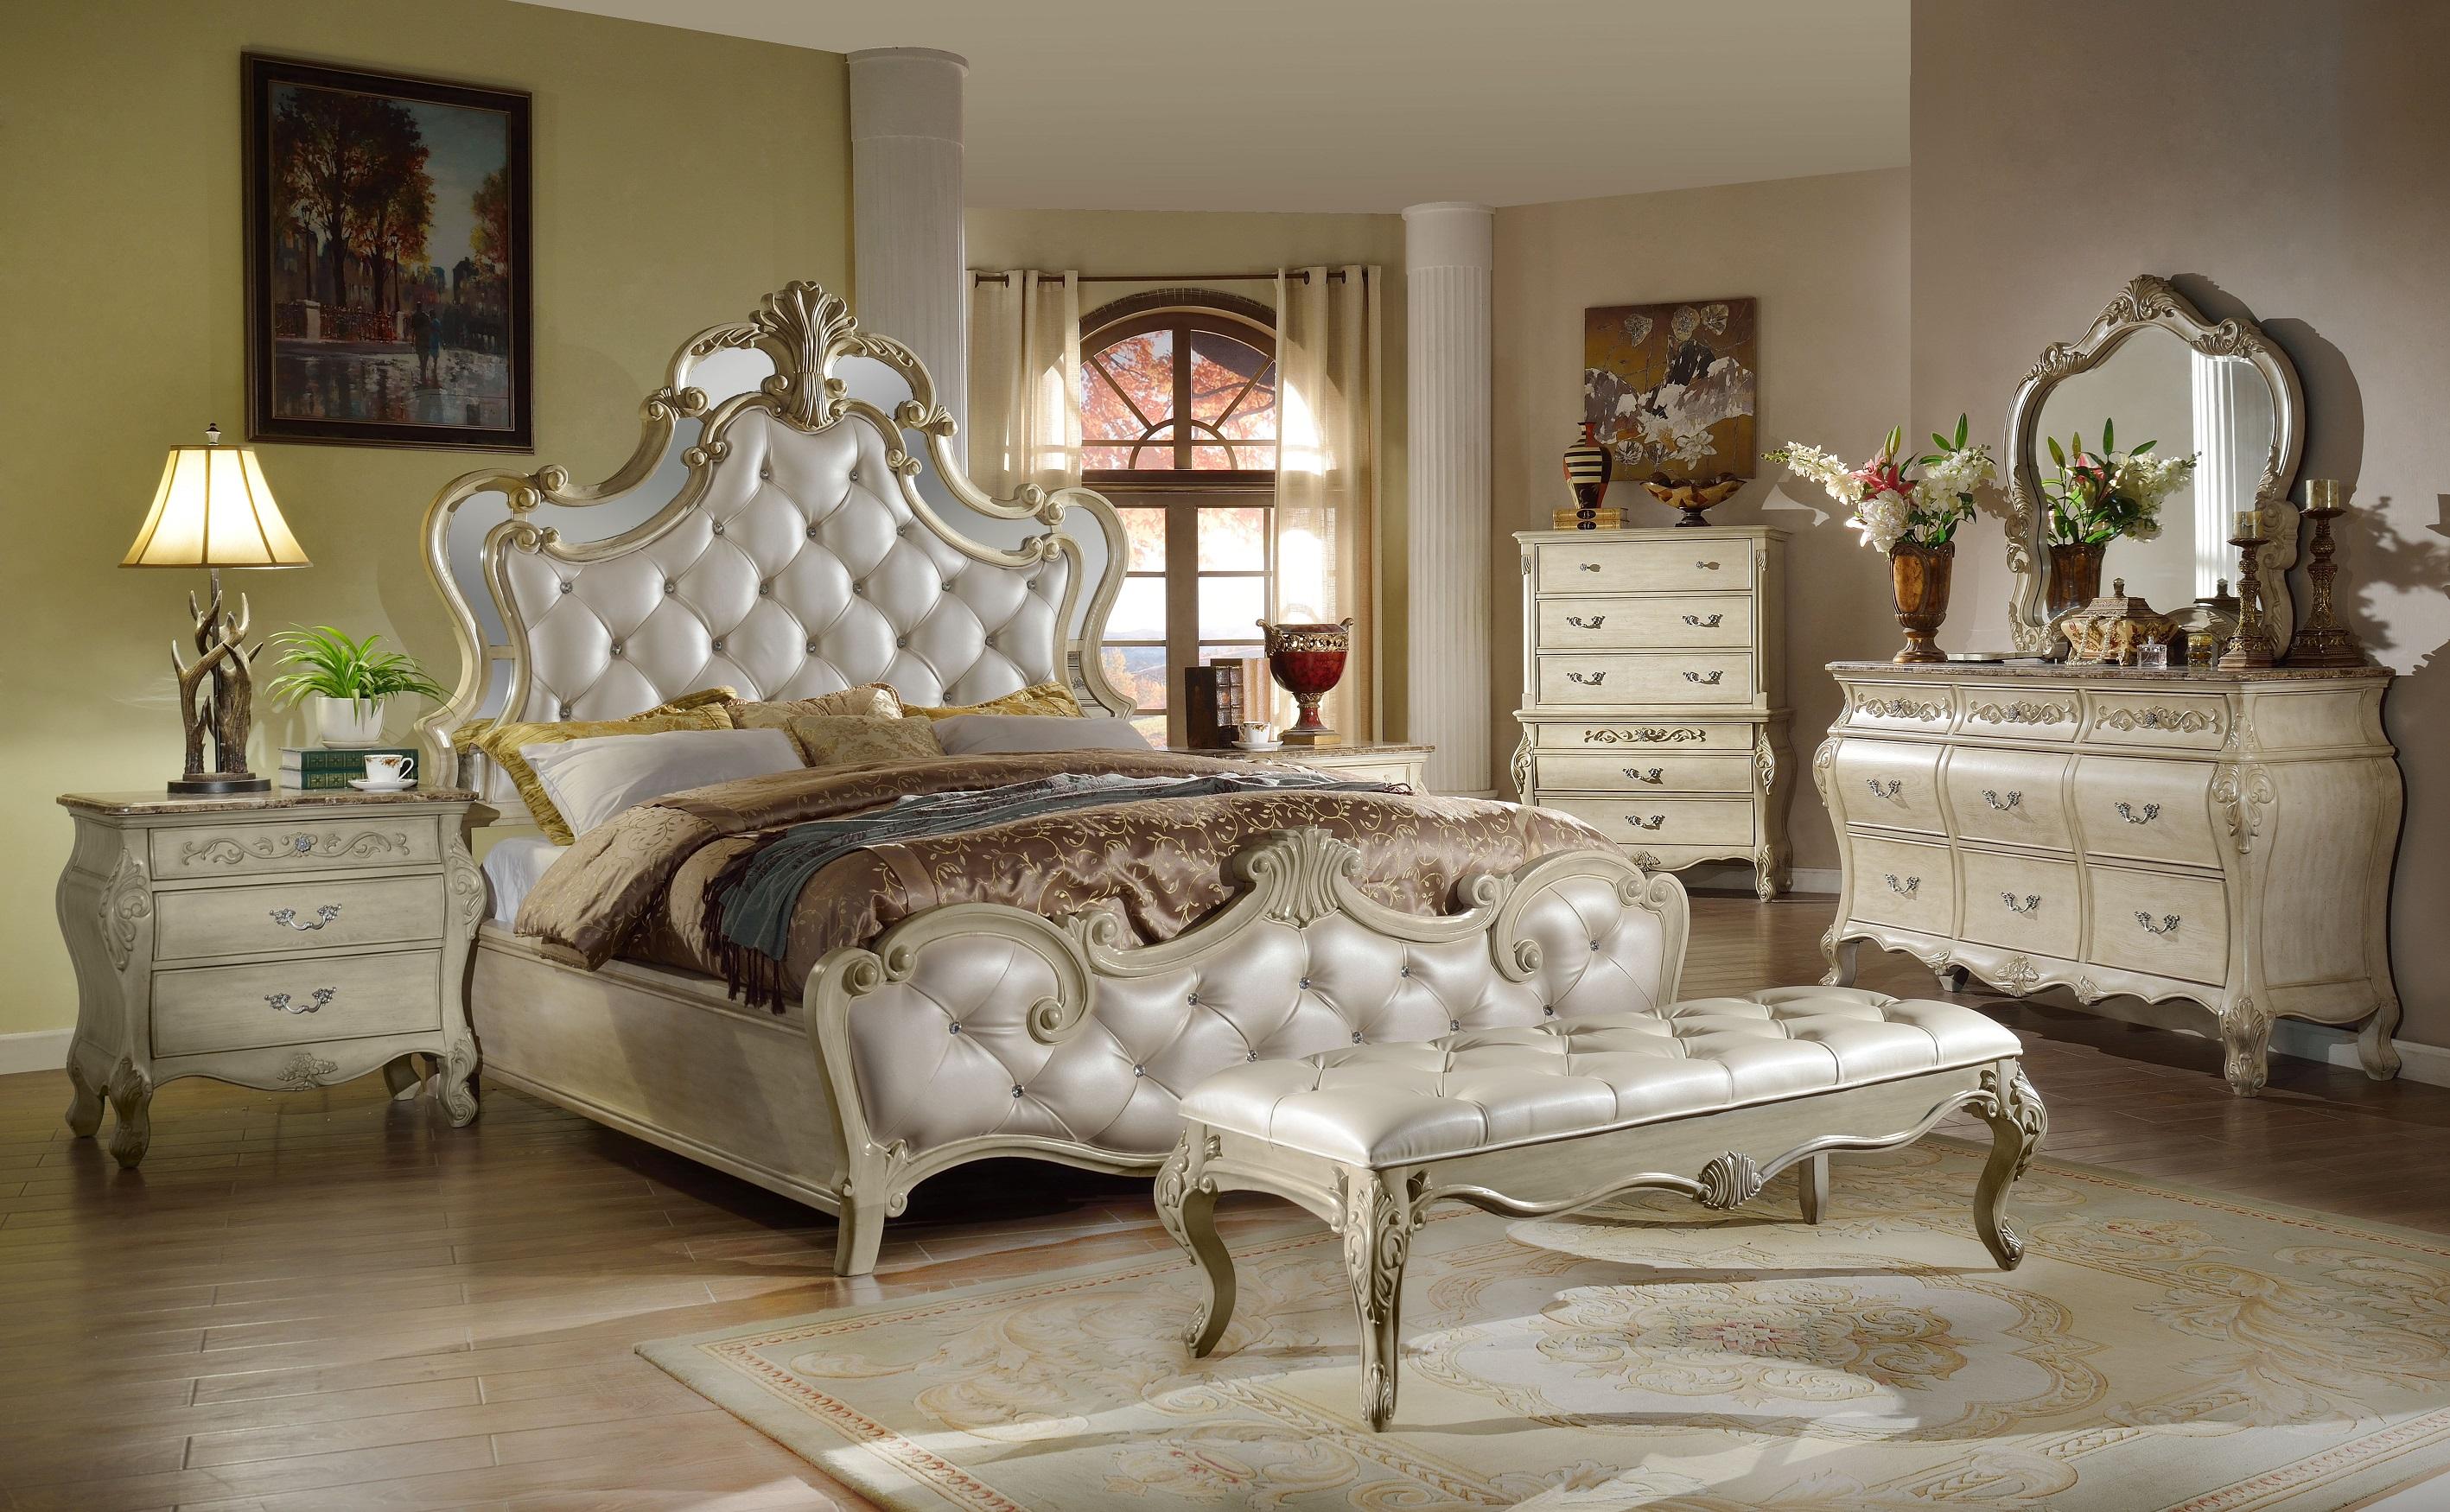 

    
McFerran B8305-CK Antique White Glamour Crystal Tufted Fabric California King Bedroom Set 5 Pcs w/Chest
